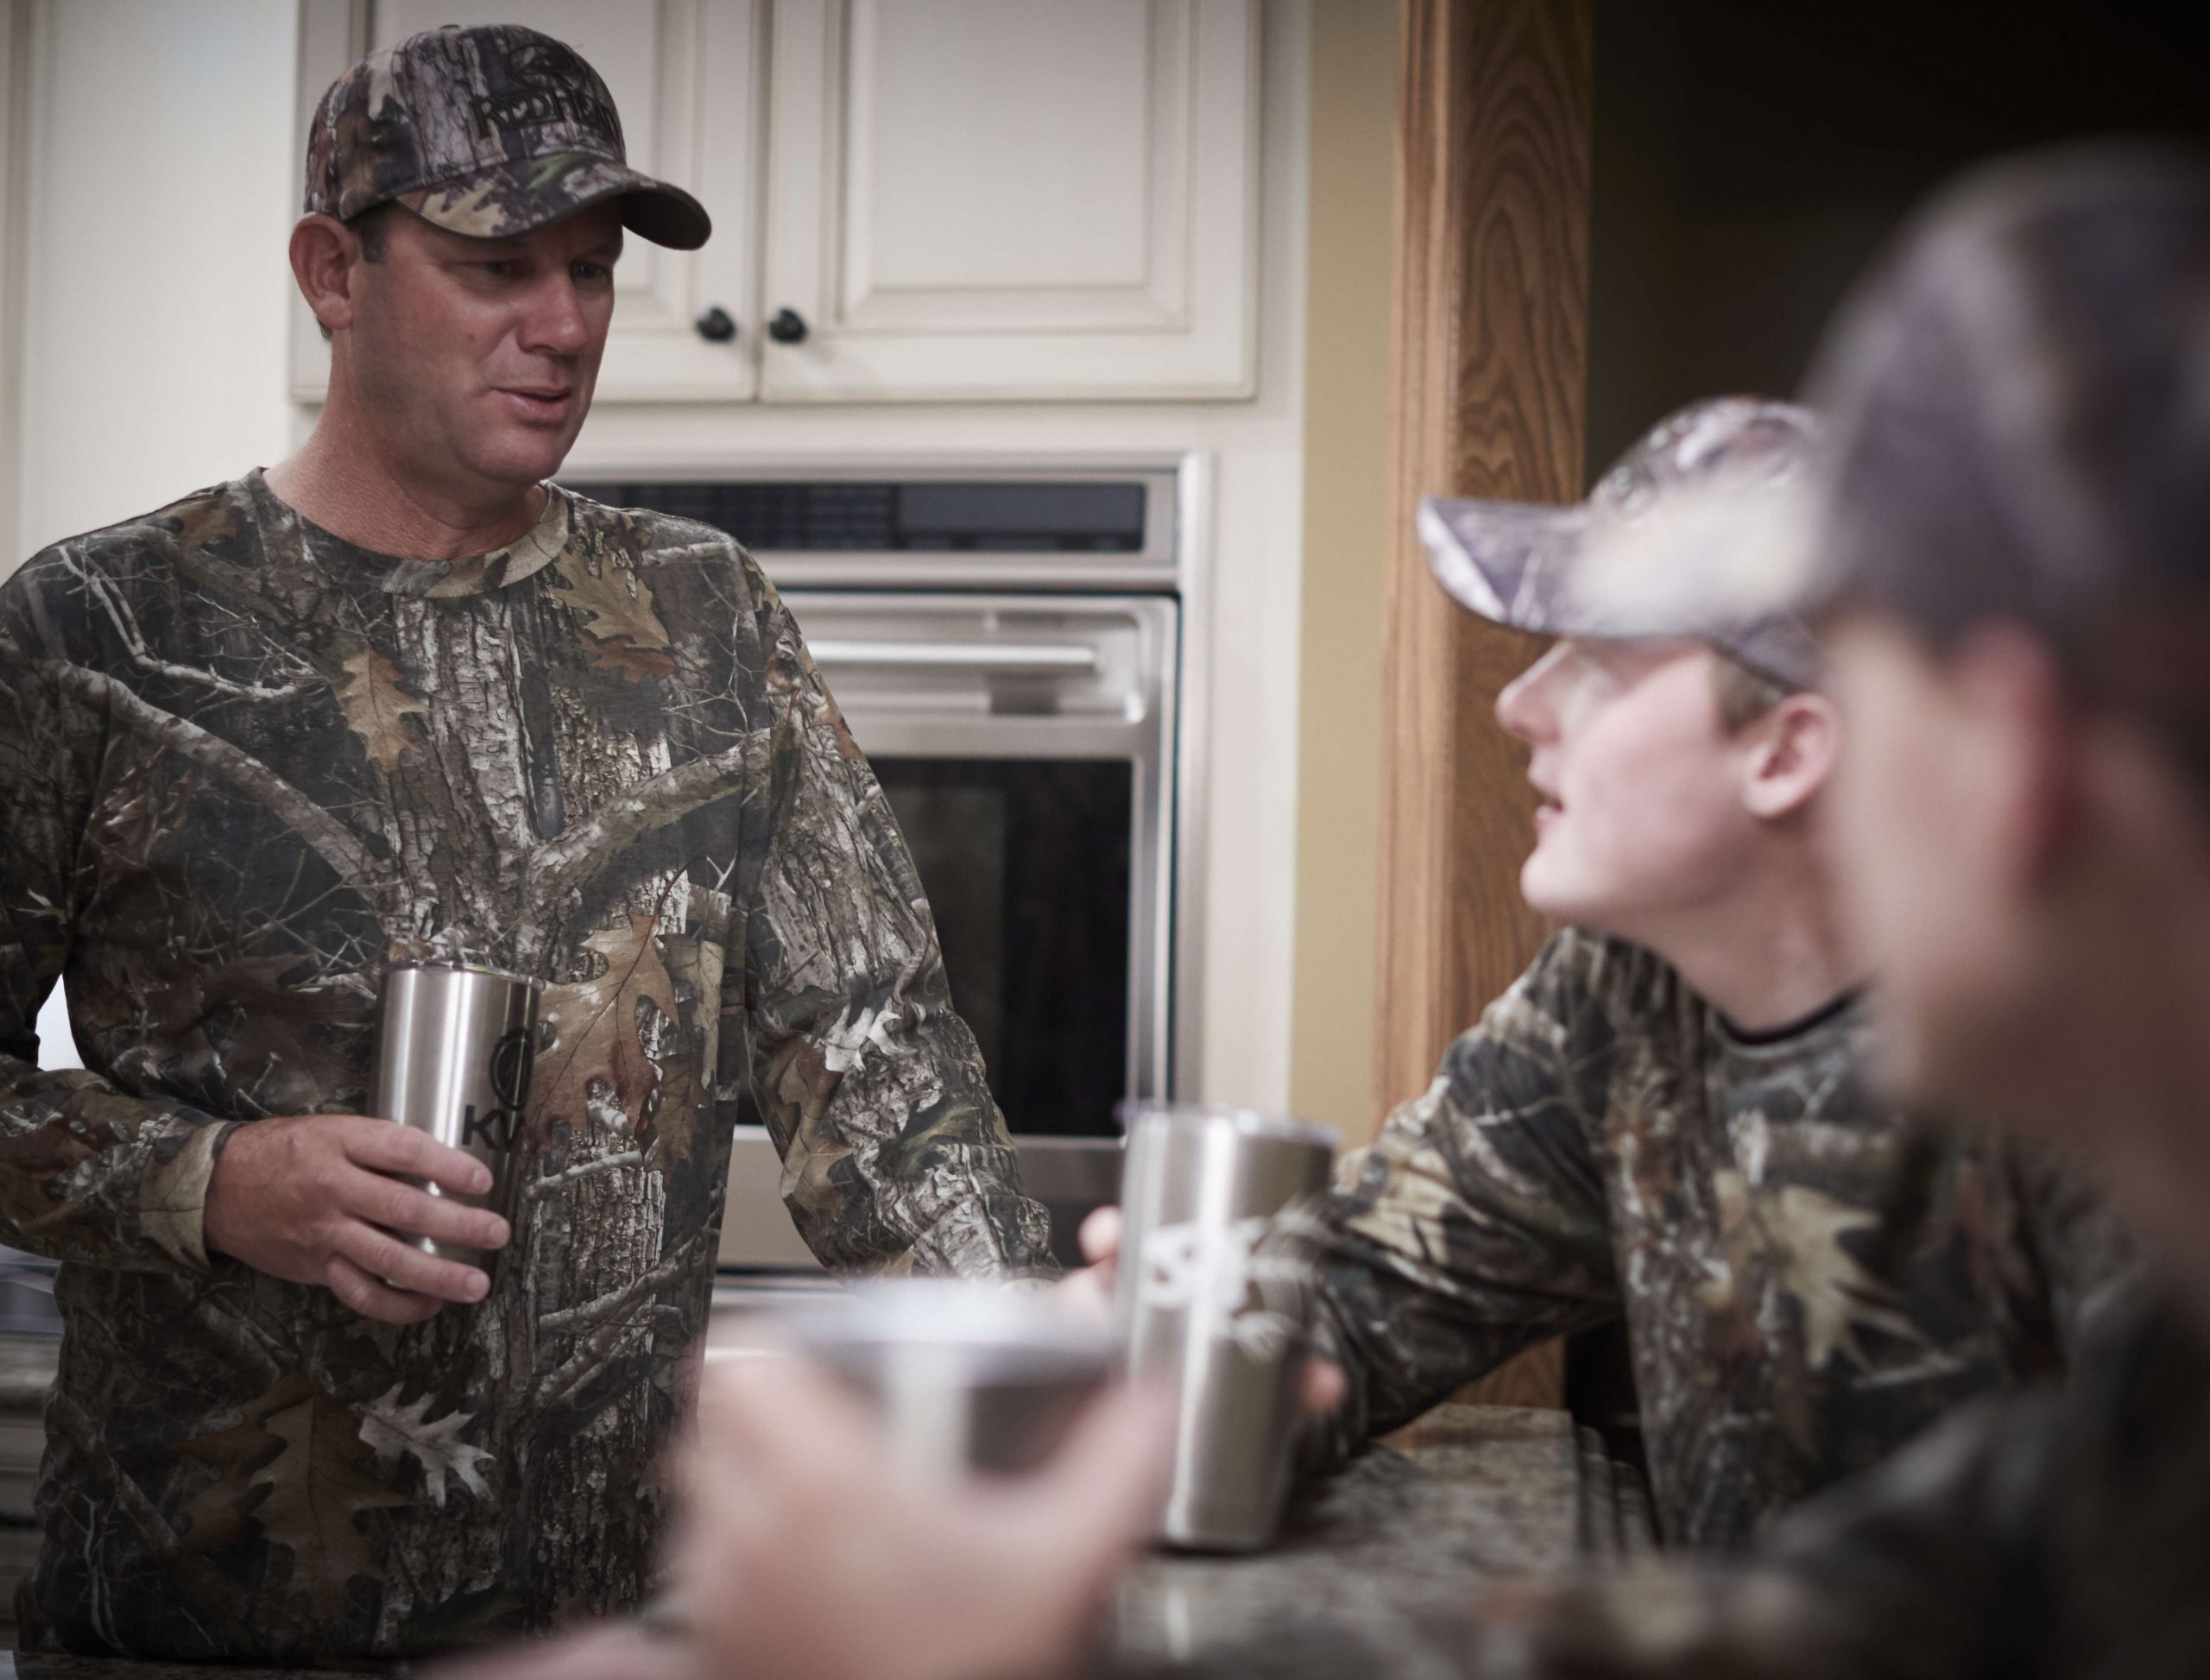 The day starts early, with Kevin VanDam â seven time Toyota Bassmaster Angler of the Year â and his sons, Jackson and Nicholas, planning the day's hunt strategy over a cup of coffee.